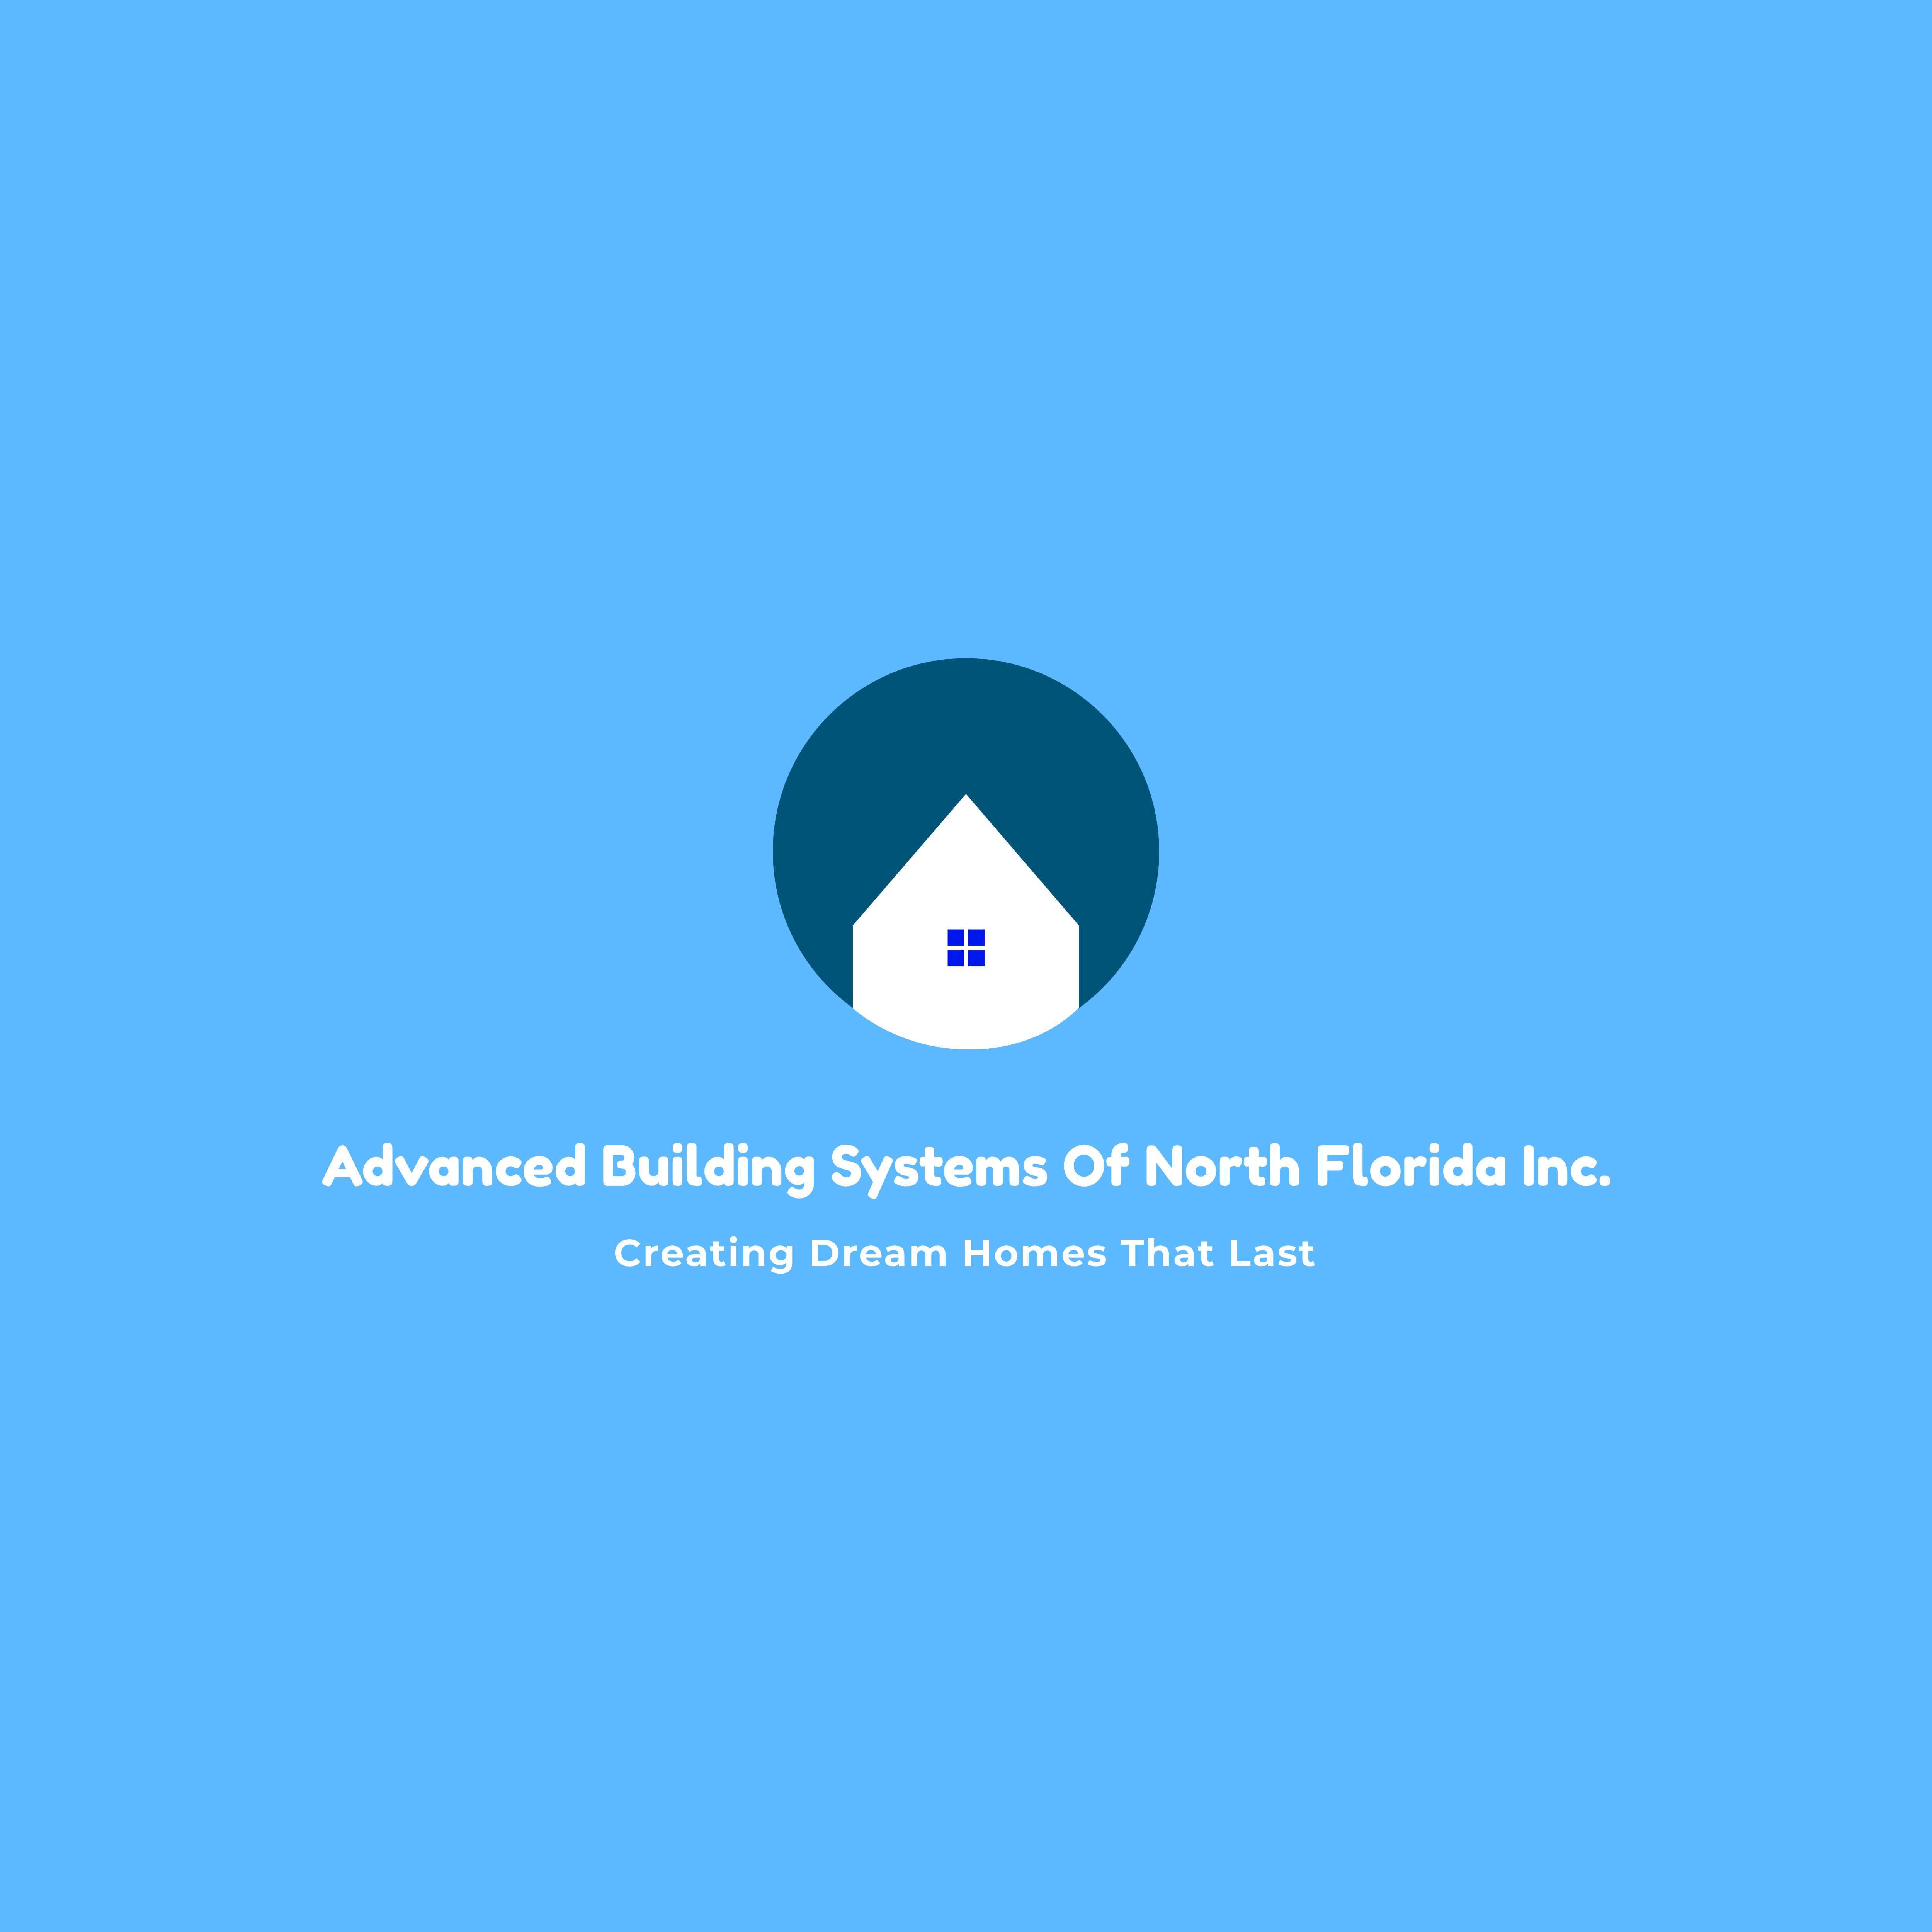 Advanced Building Systems of North Florida, Inc. Logo